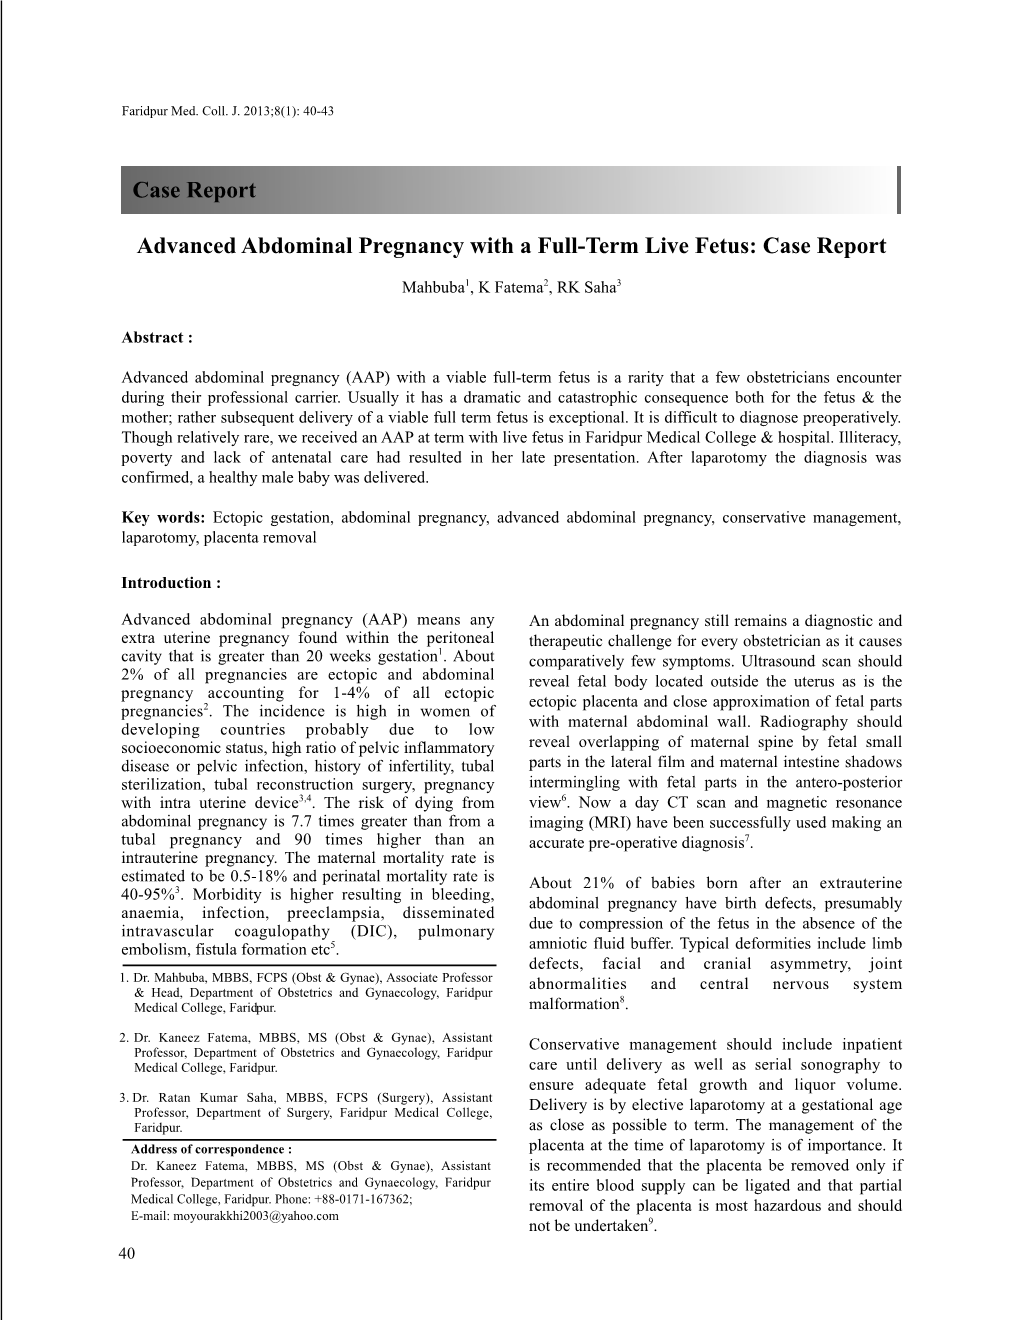 Advanced Abdominal Pregnancy with a Full-Term Live Fetus: Case Report